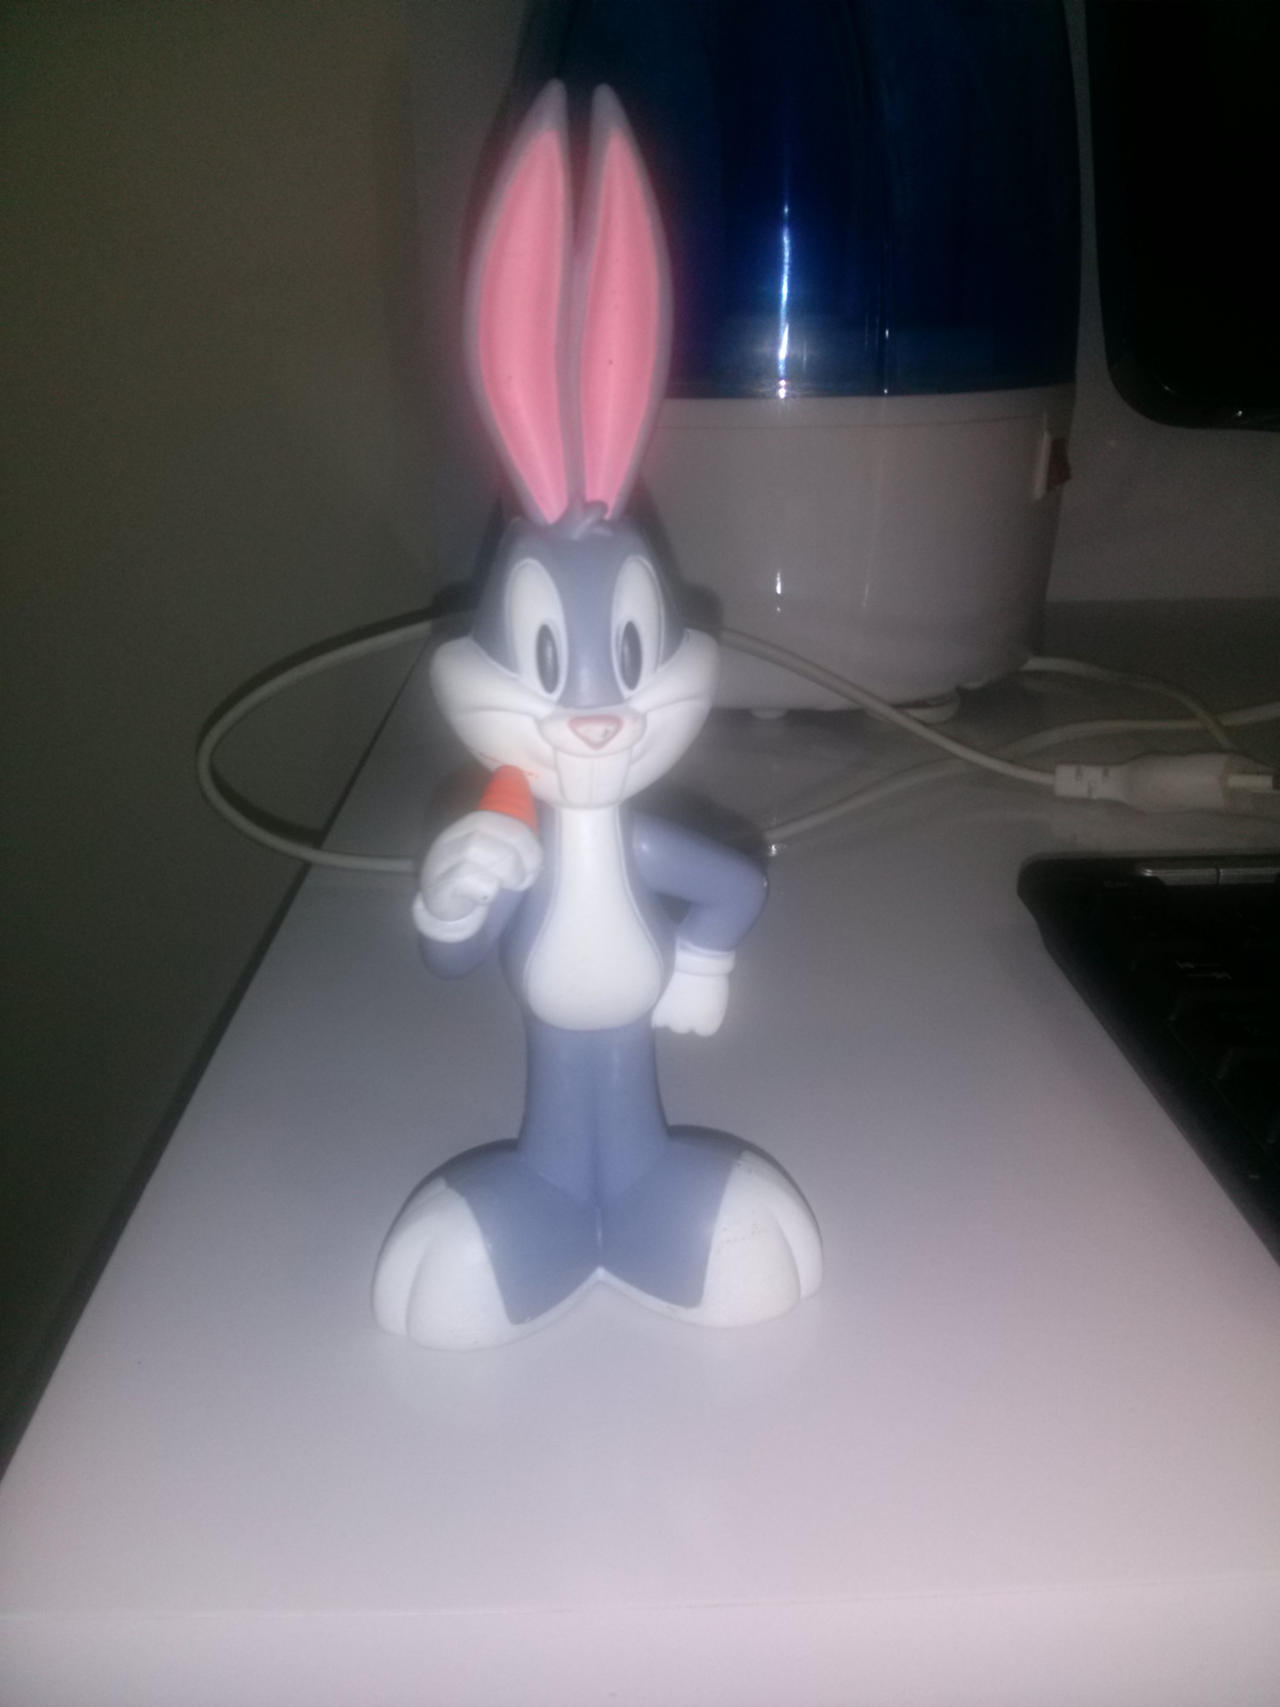 My Bugs Bunny toy